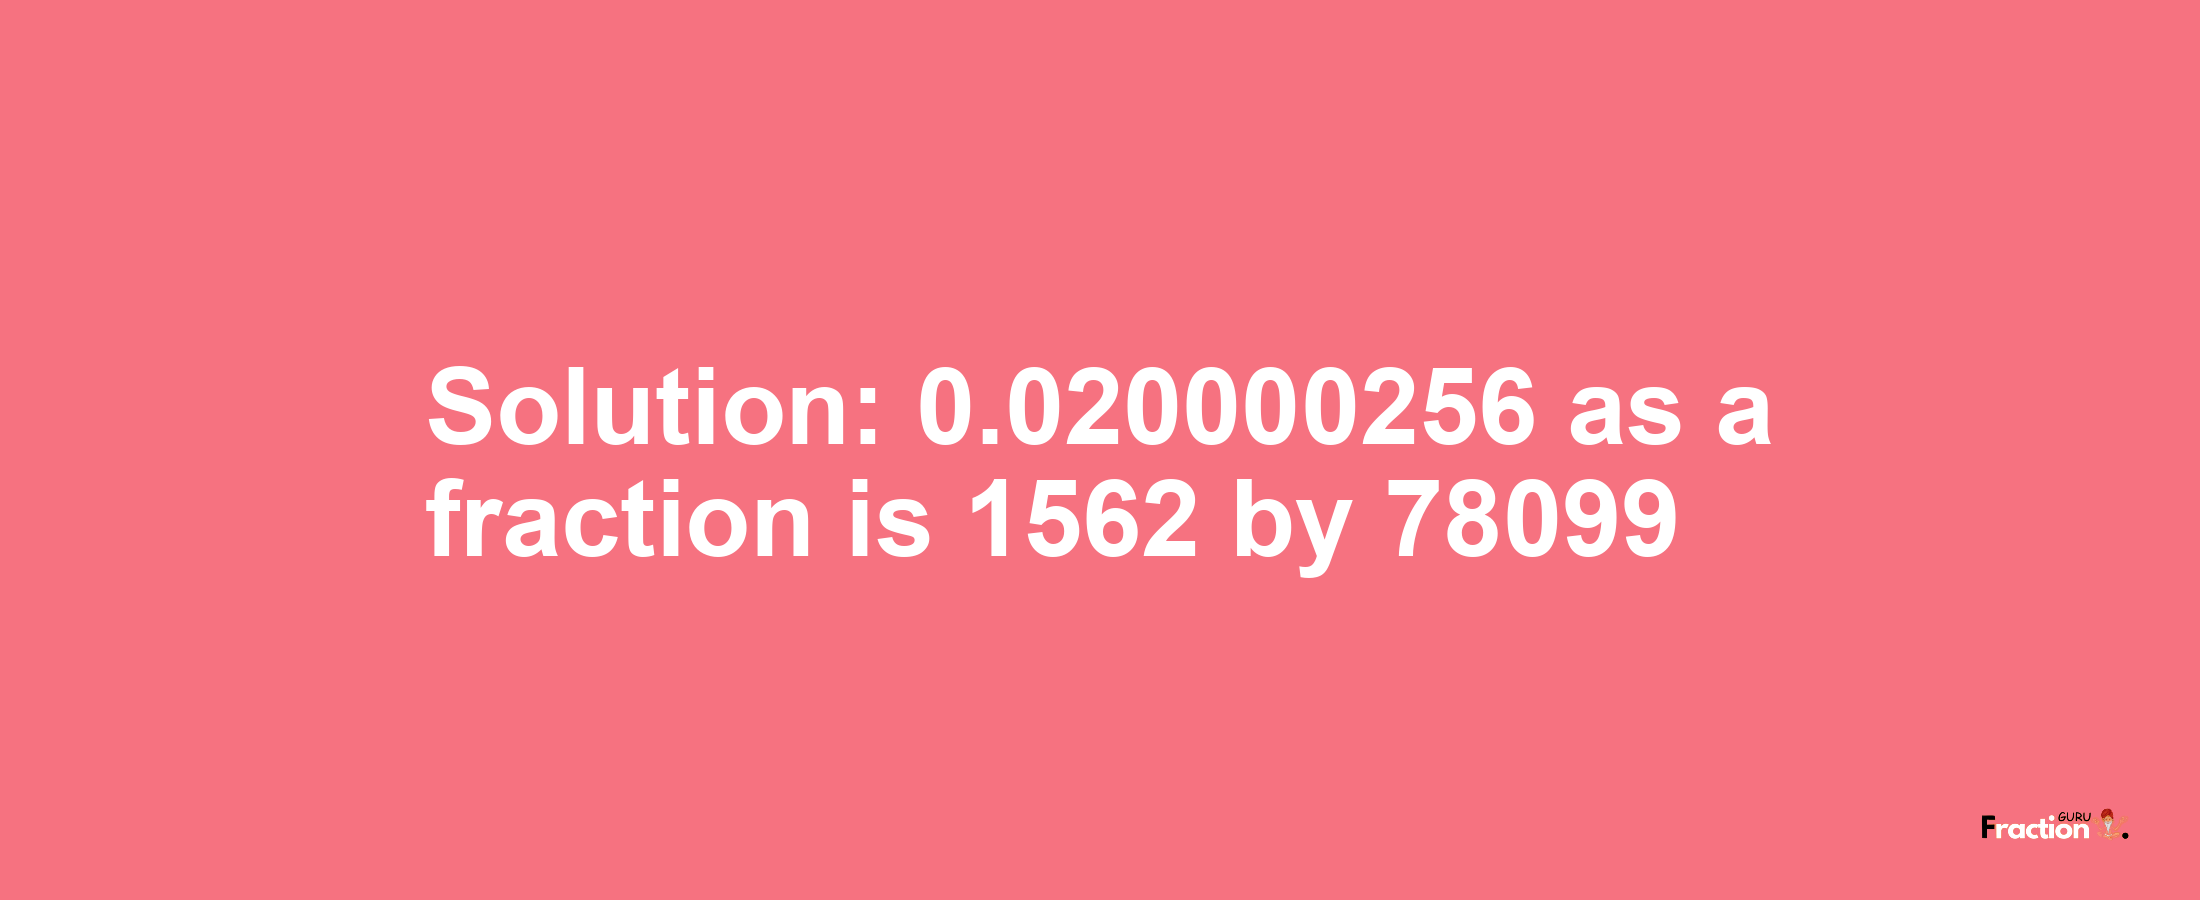 Solution:0.020000256 as a fraction is 1562/78099